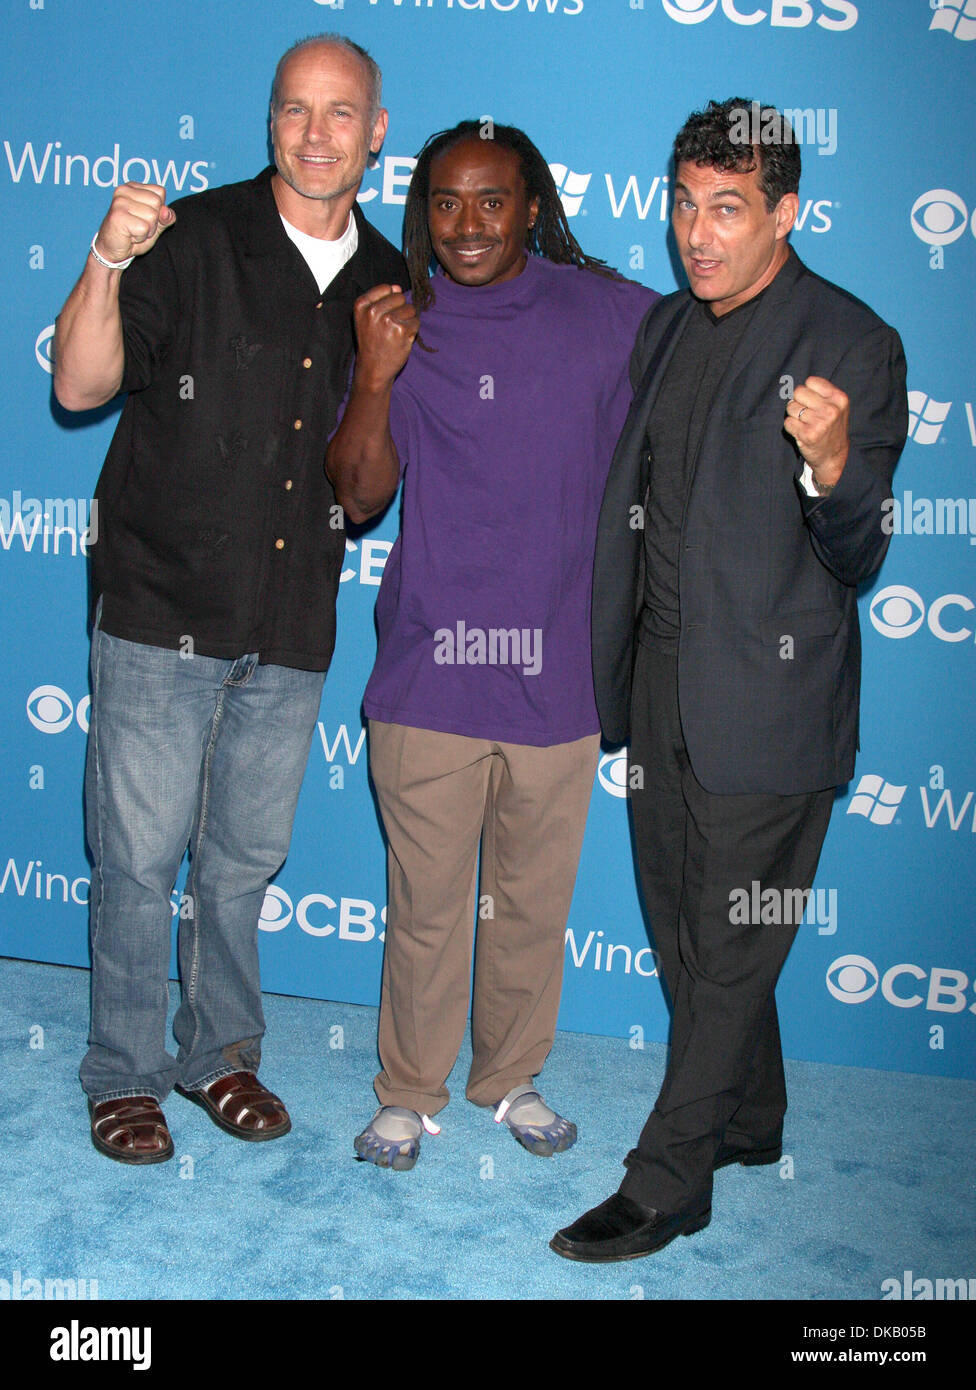 Mike Skupin Russell Swan Jonathan Penner at CBS 2012 Fall Premiere Party at Greystone Manor - Arrivals Los Angeles California - Stock Photo